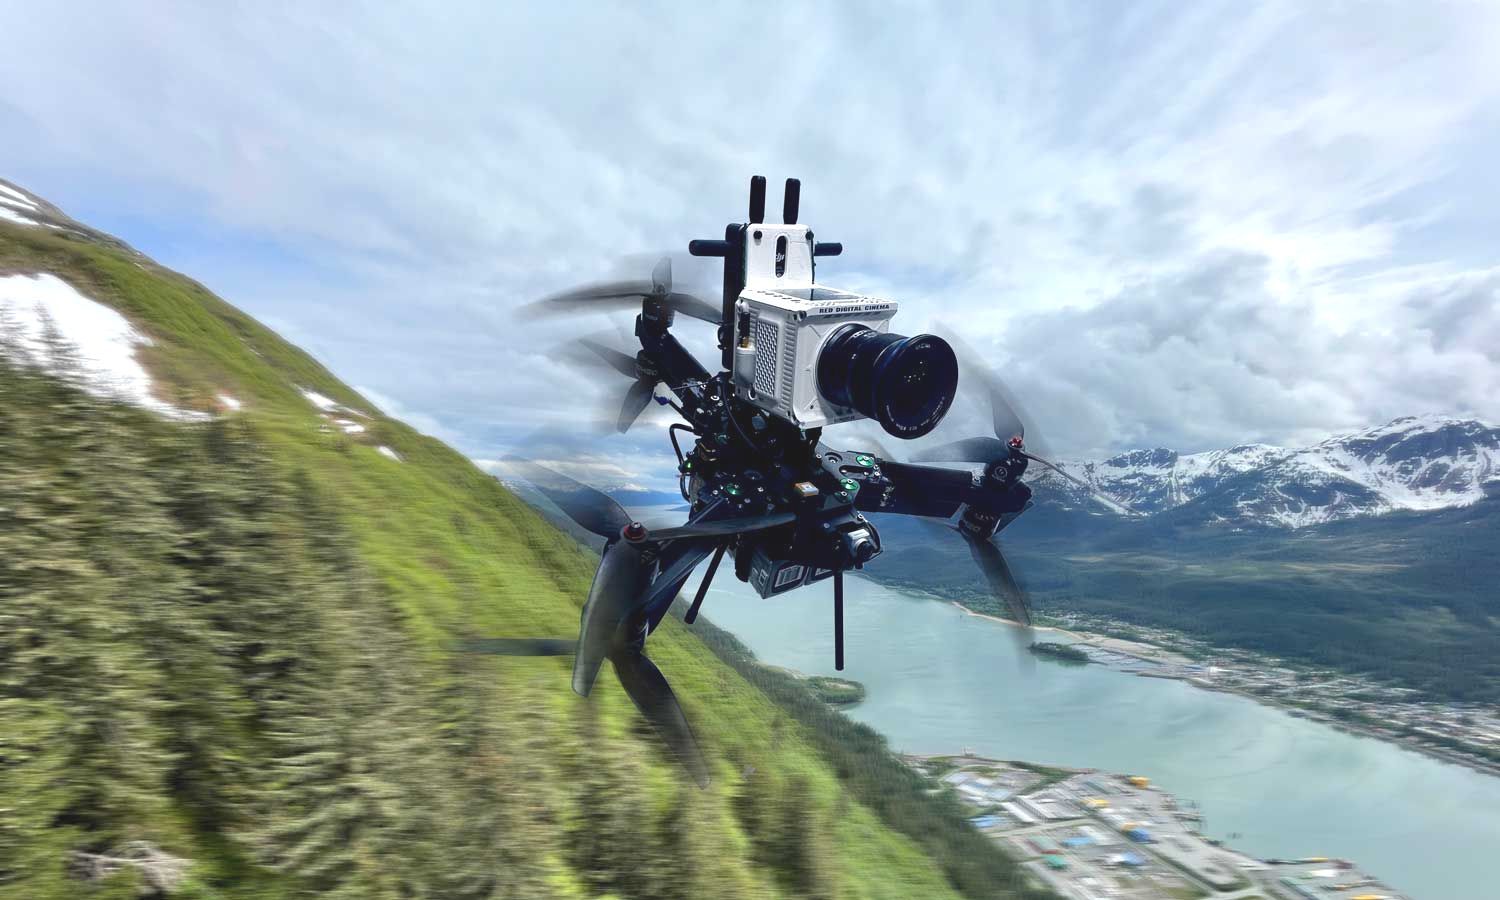 A drone is flying over a mountain with a river in the background.